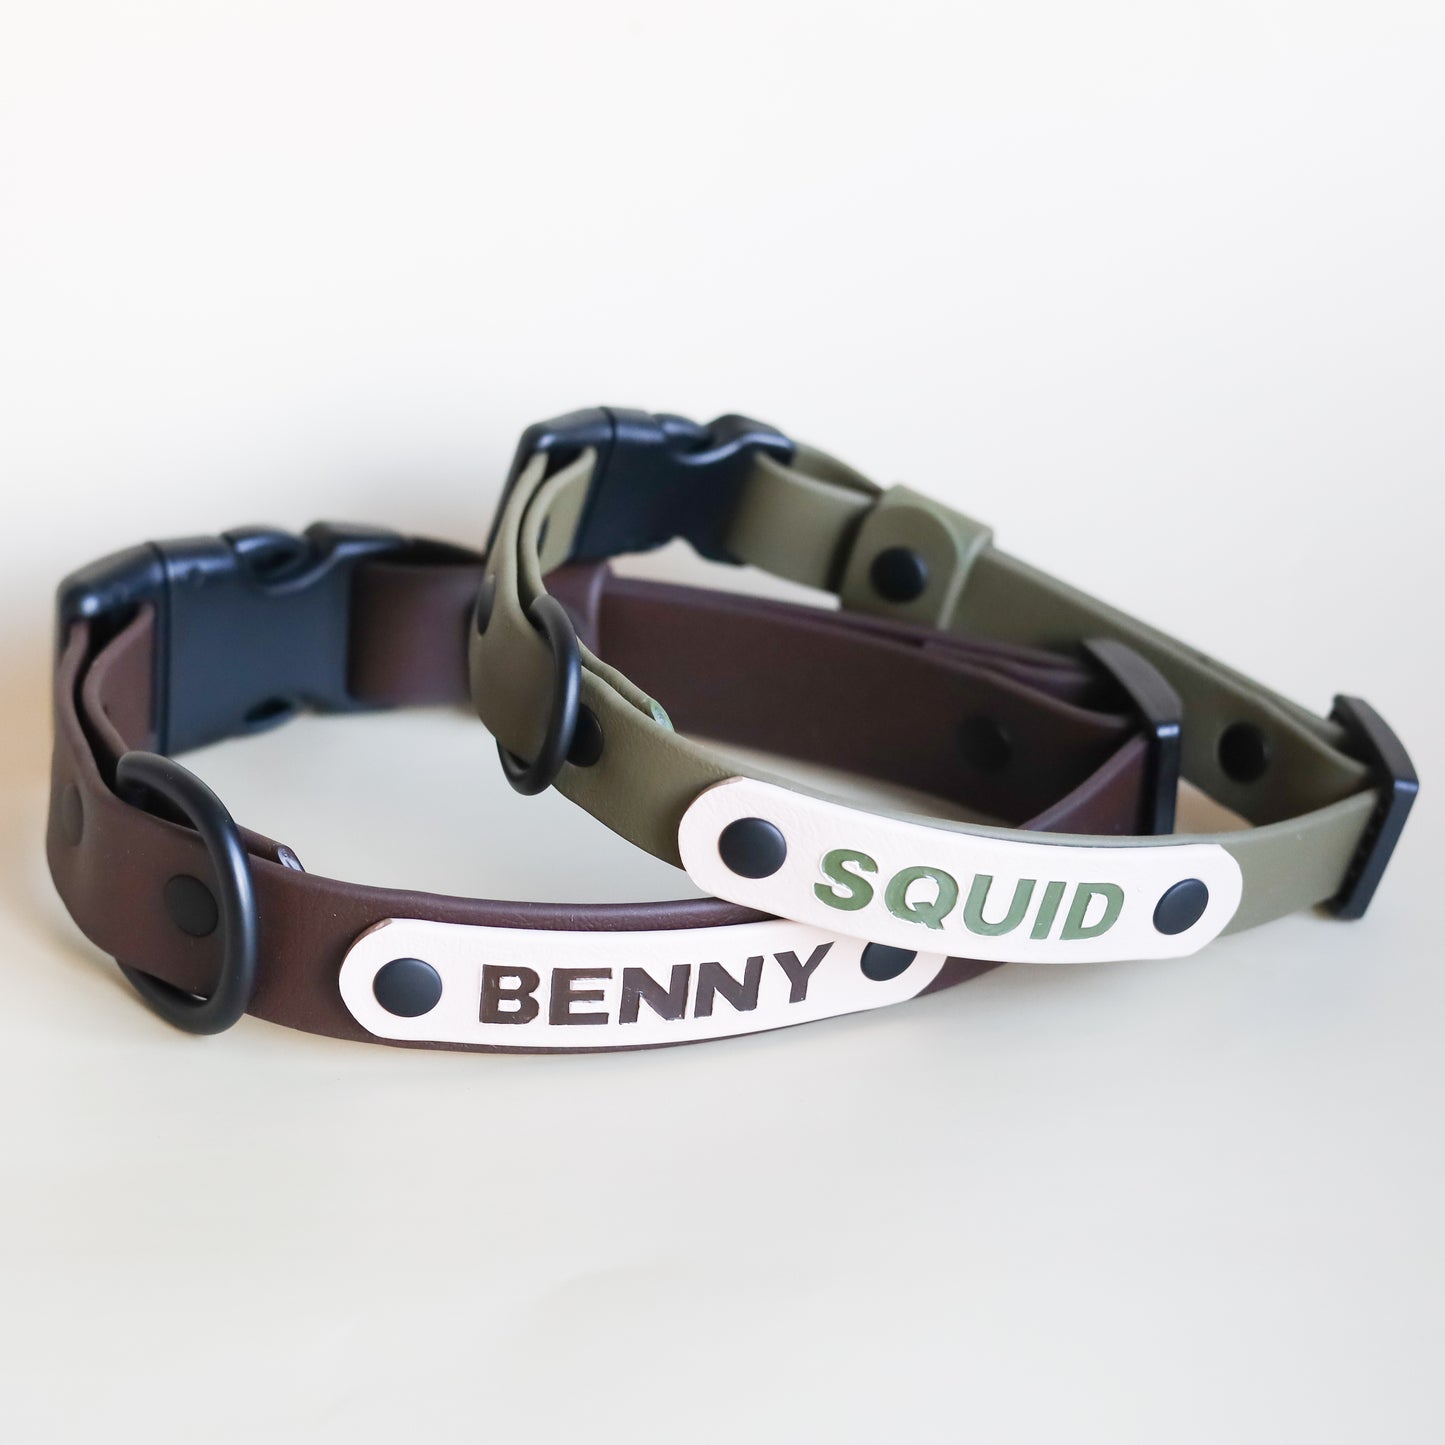 Adjustable collar with quick release buckle